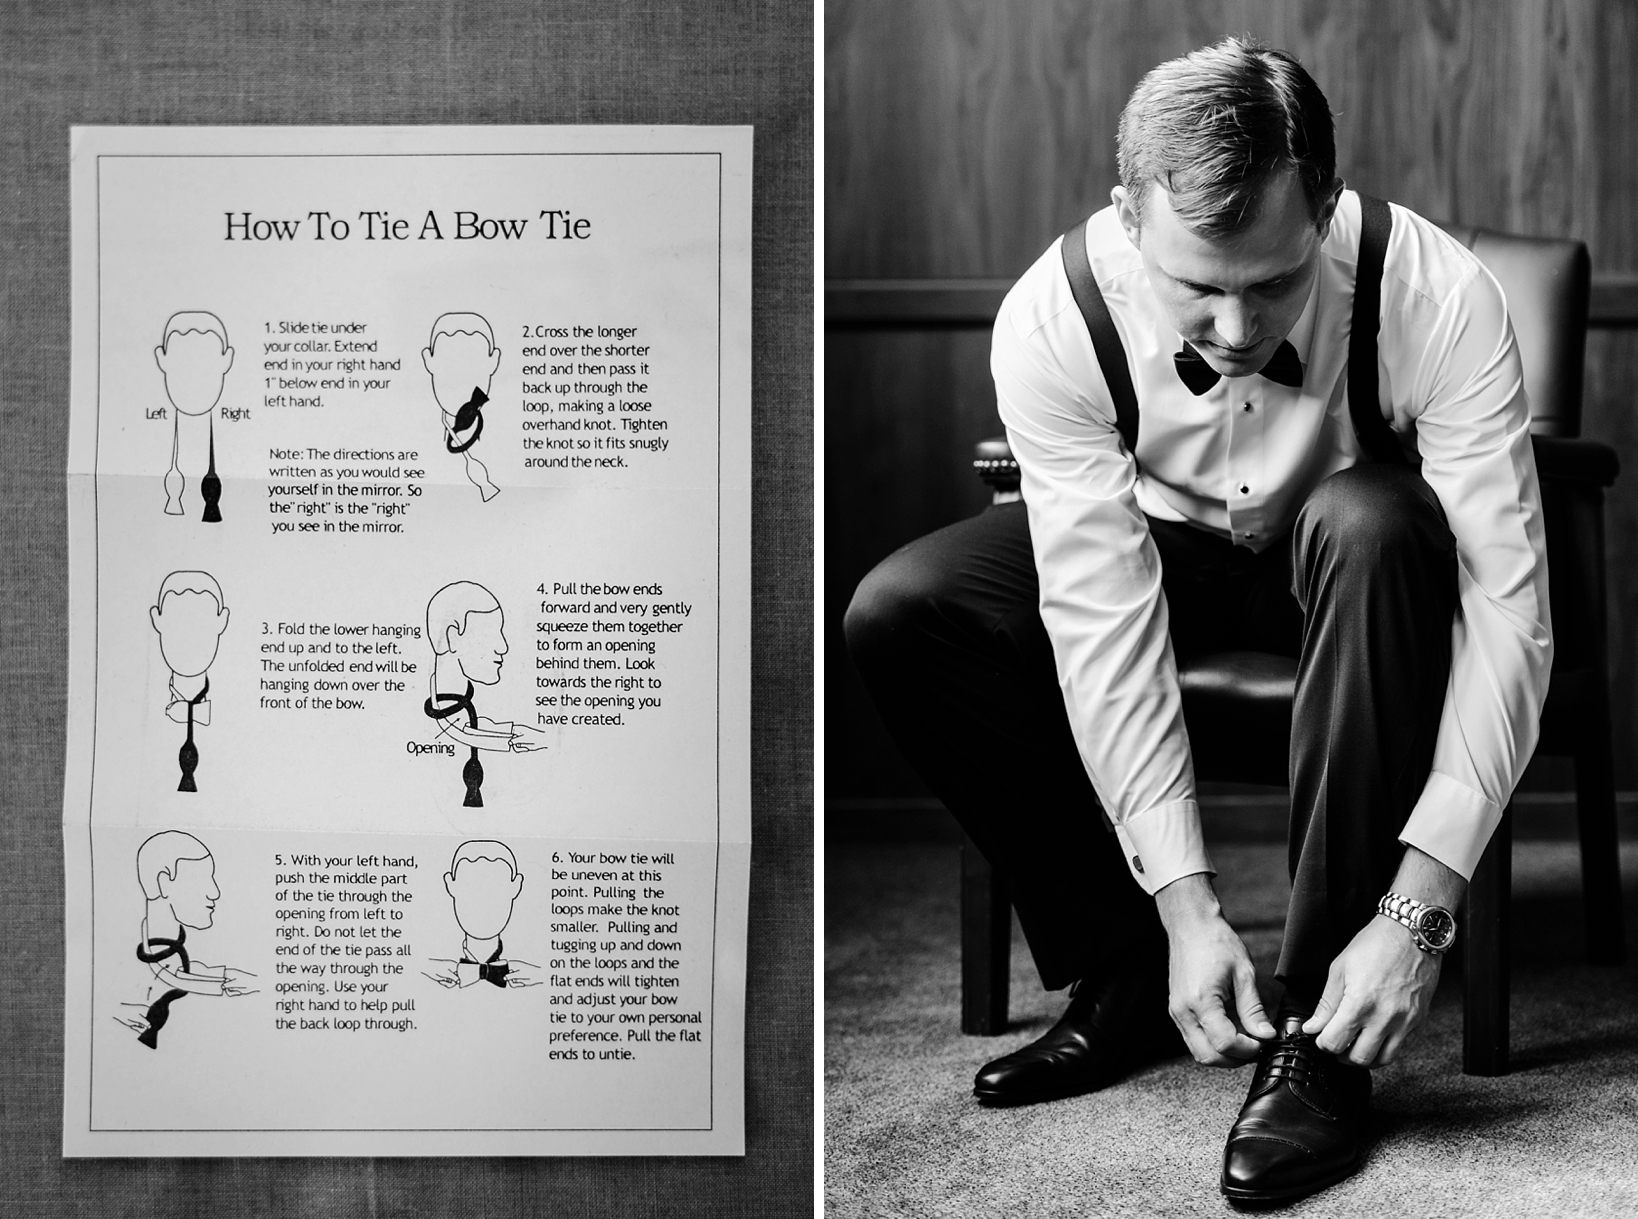 Groom putting his shoes on next to an image of instructions on how to tie a bowtie. 